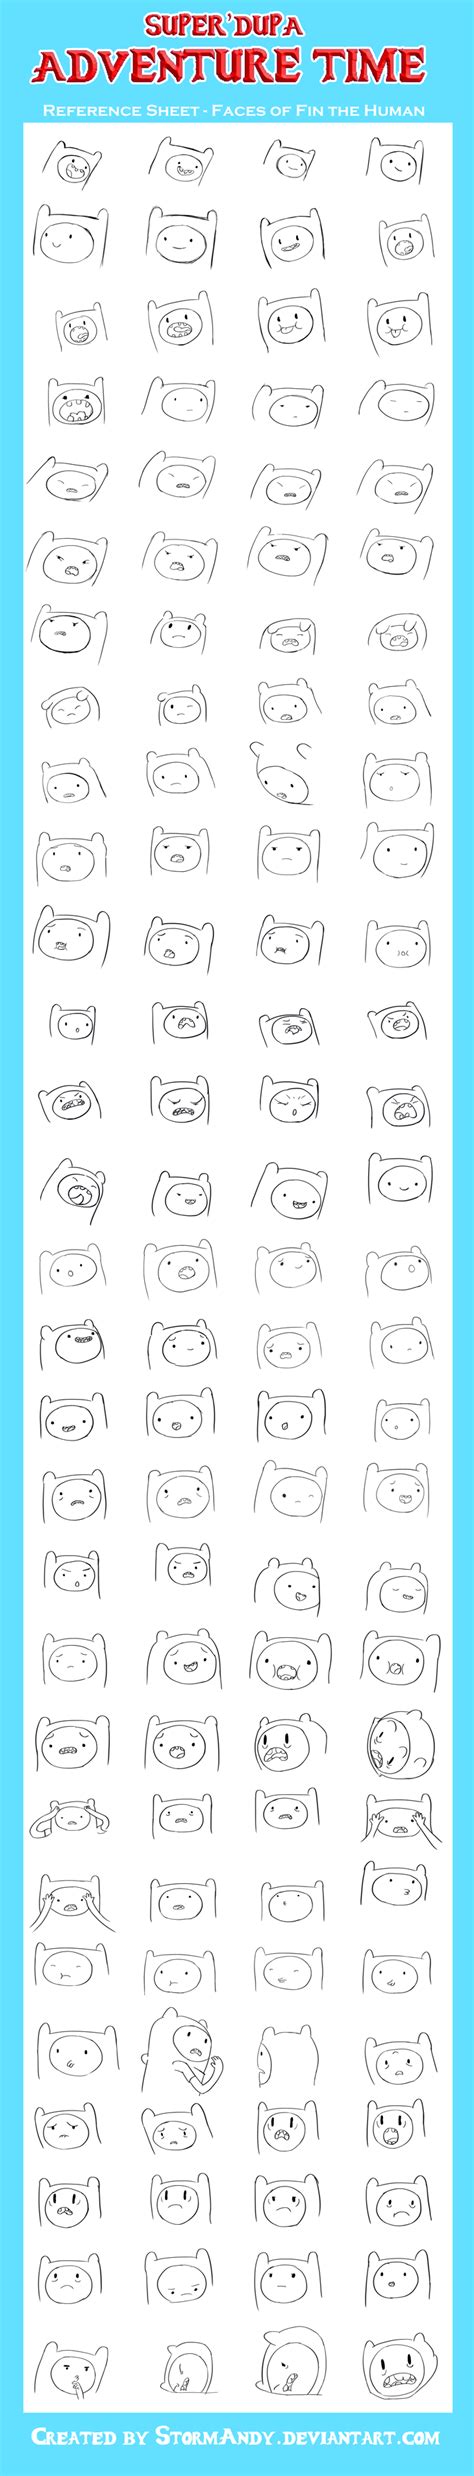 Drawing Finns Faces Template Adventure Time With Finn